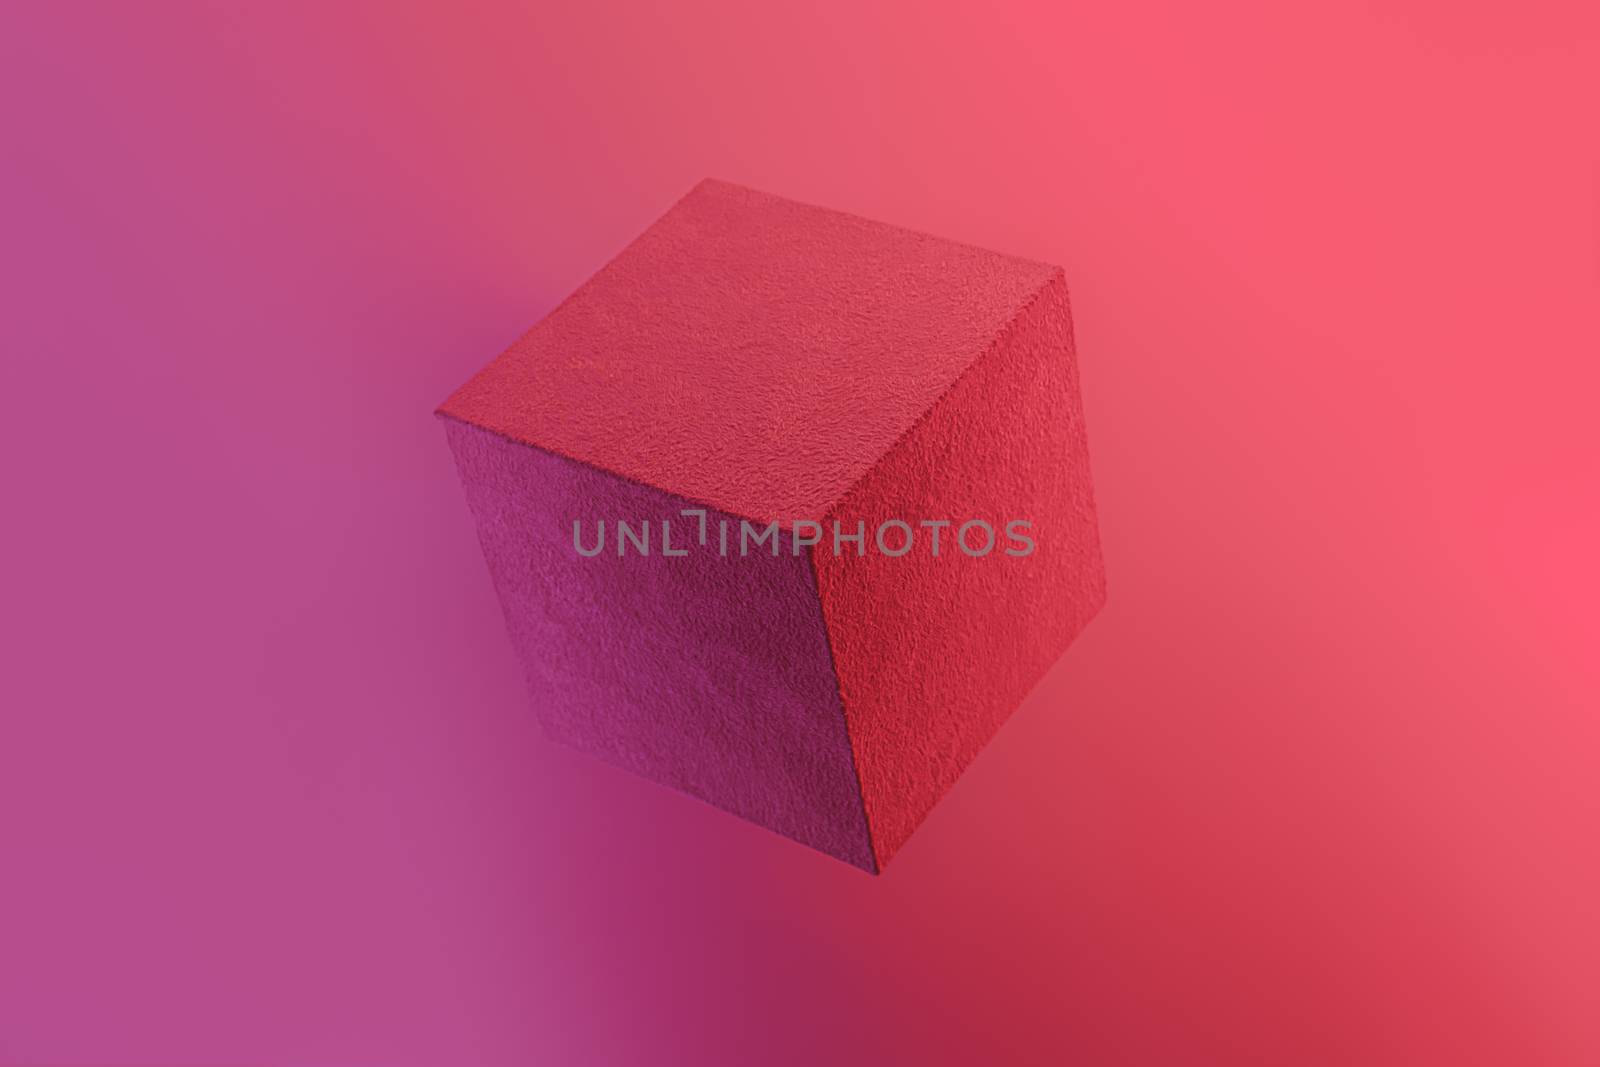 Geometric cube figure in vibrant neon colors by photoboyko